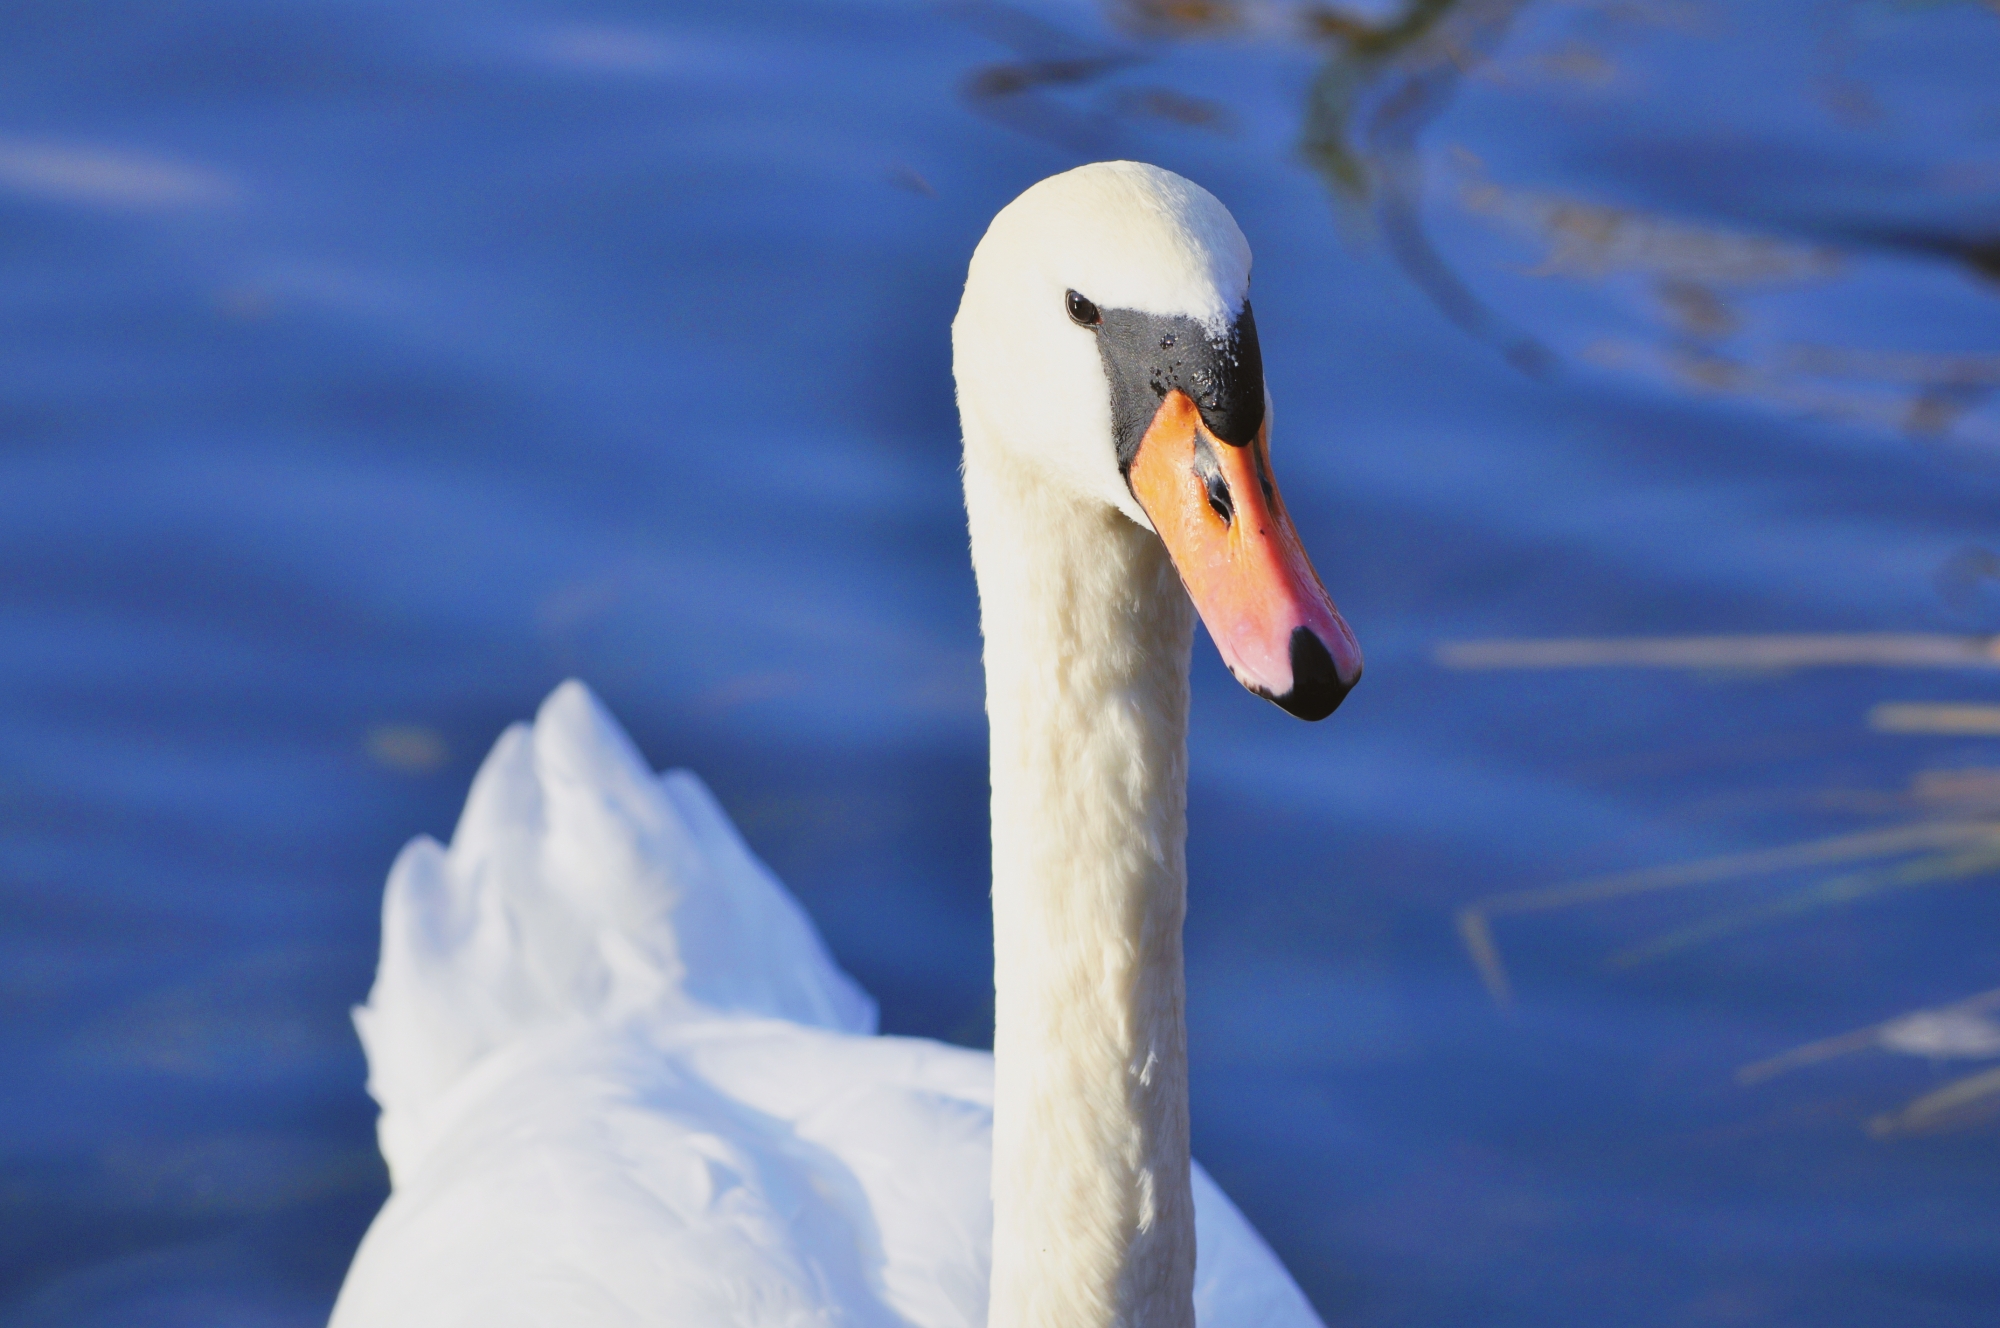 A photo of a swan sat upon a lake